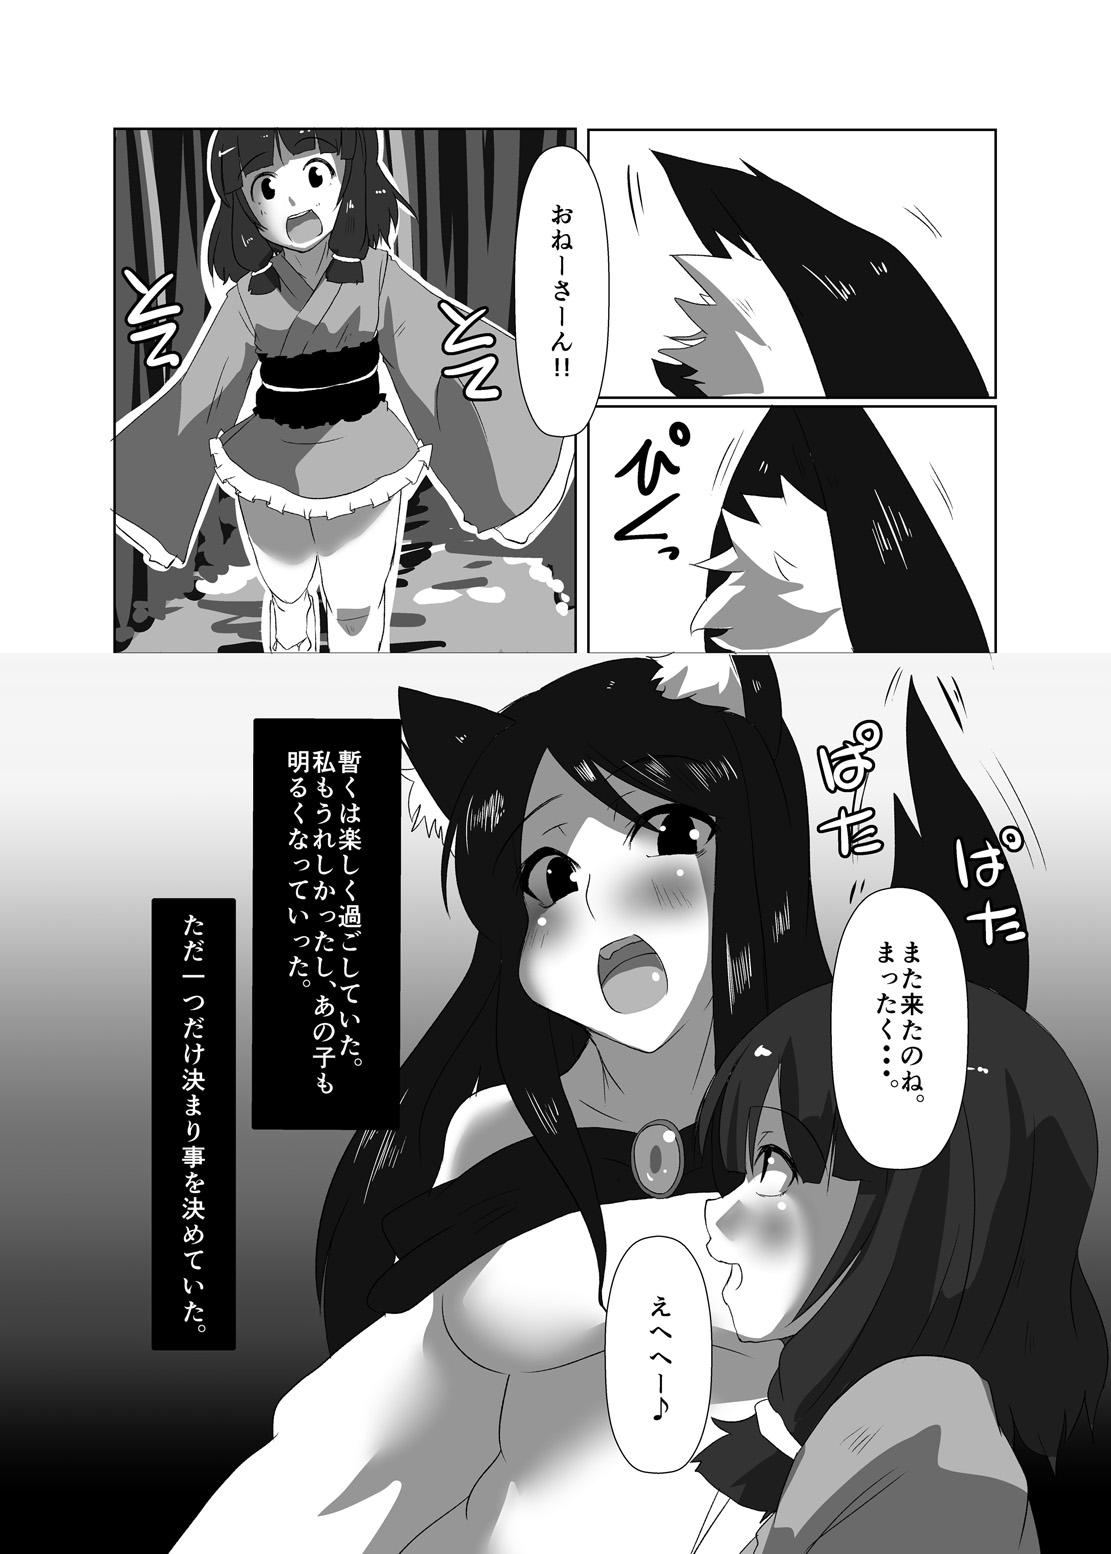 Lolicon ELonely Wolf no Onee-san - Touhou project Collar - Page 12